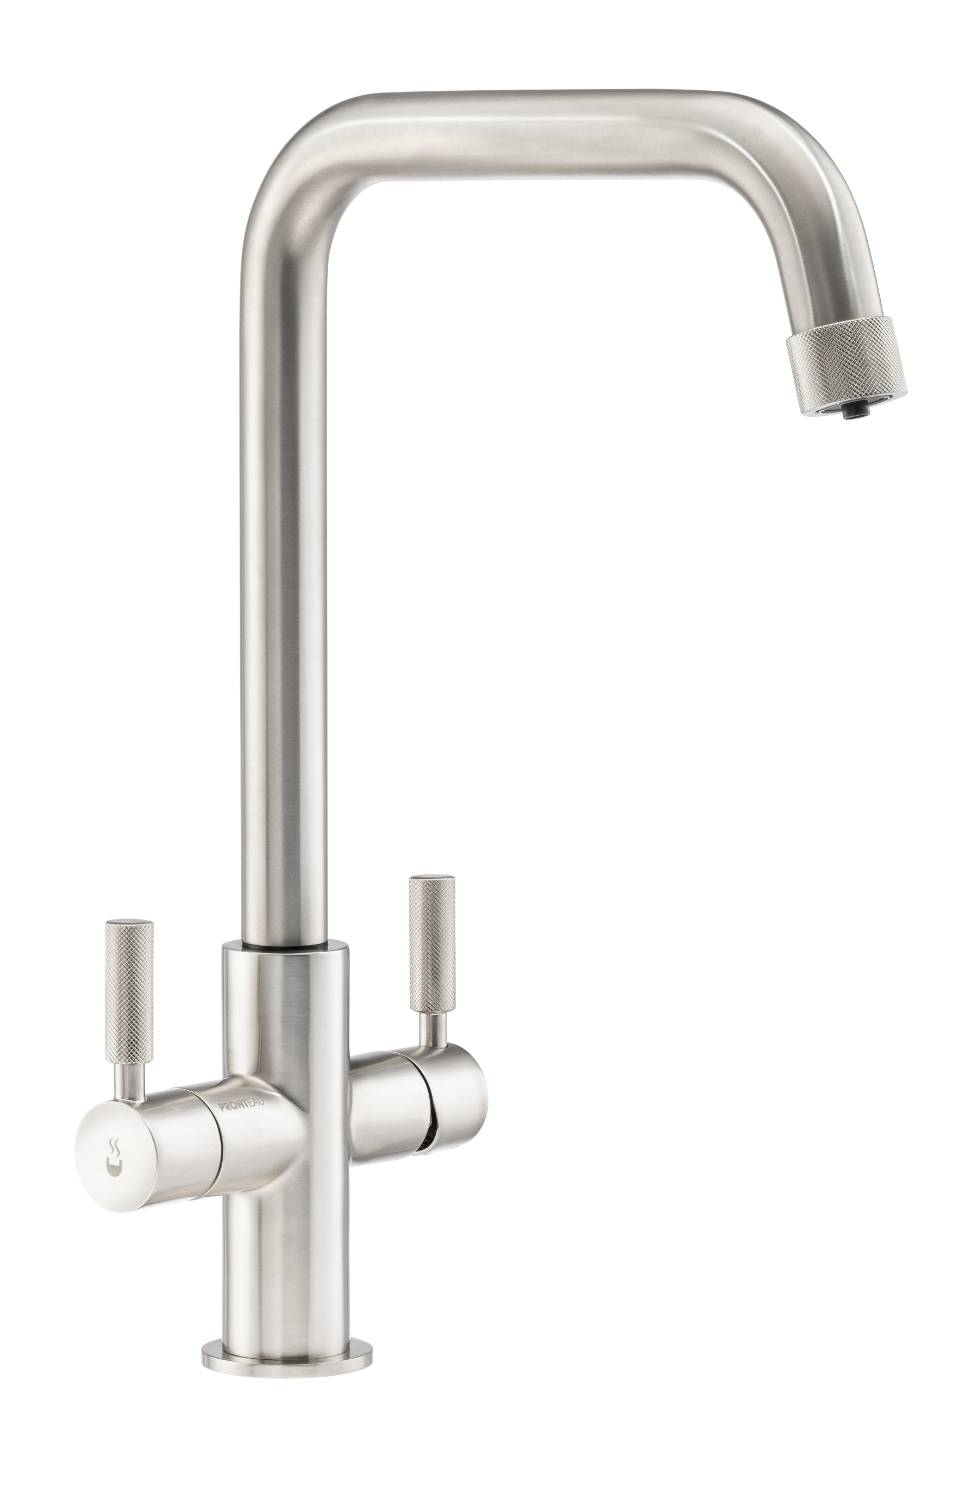 PRONTEAU™ Industria - 3 IN 1 Industrial Style Instant Steaming Hot Water Tap - Boiling Water Tap 